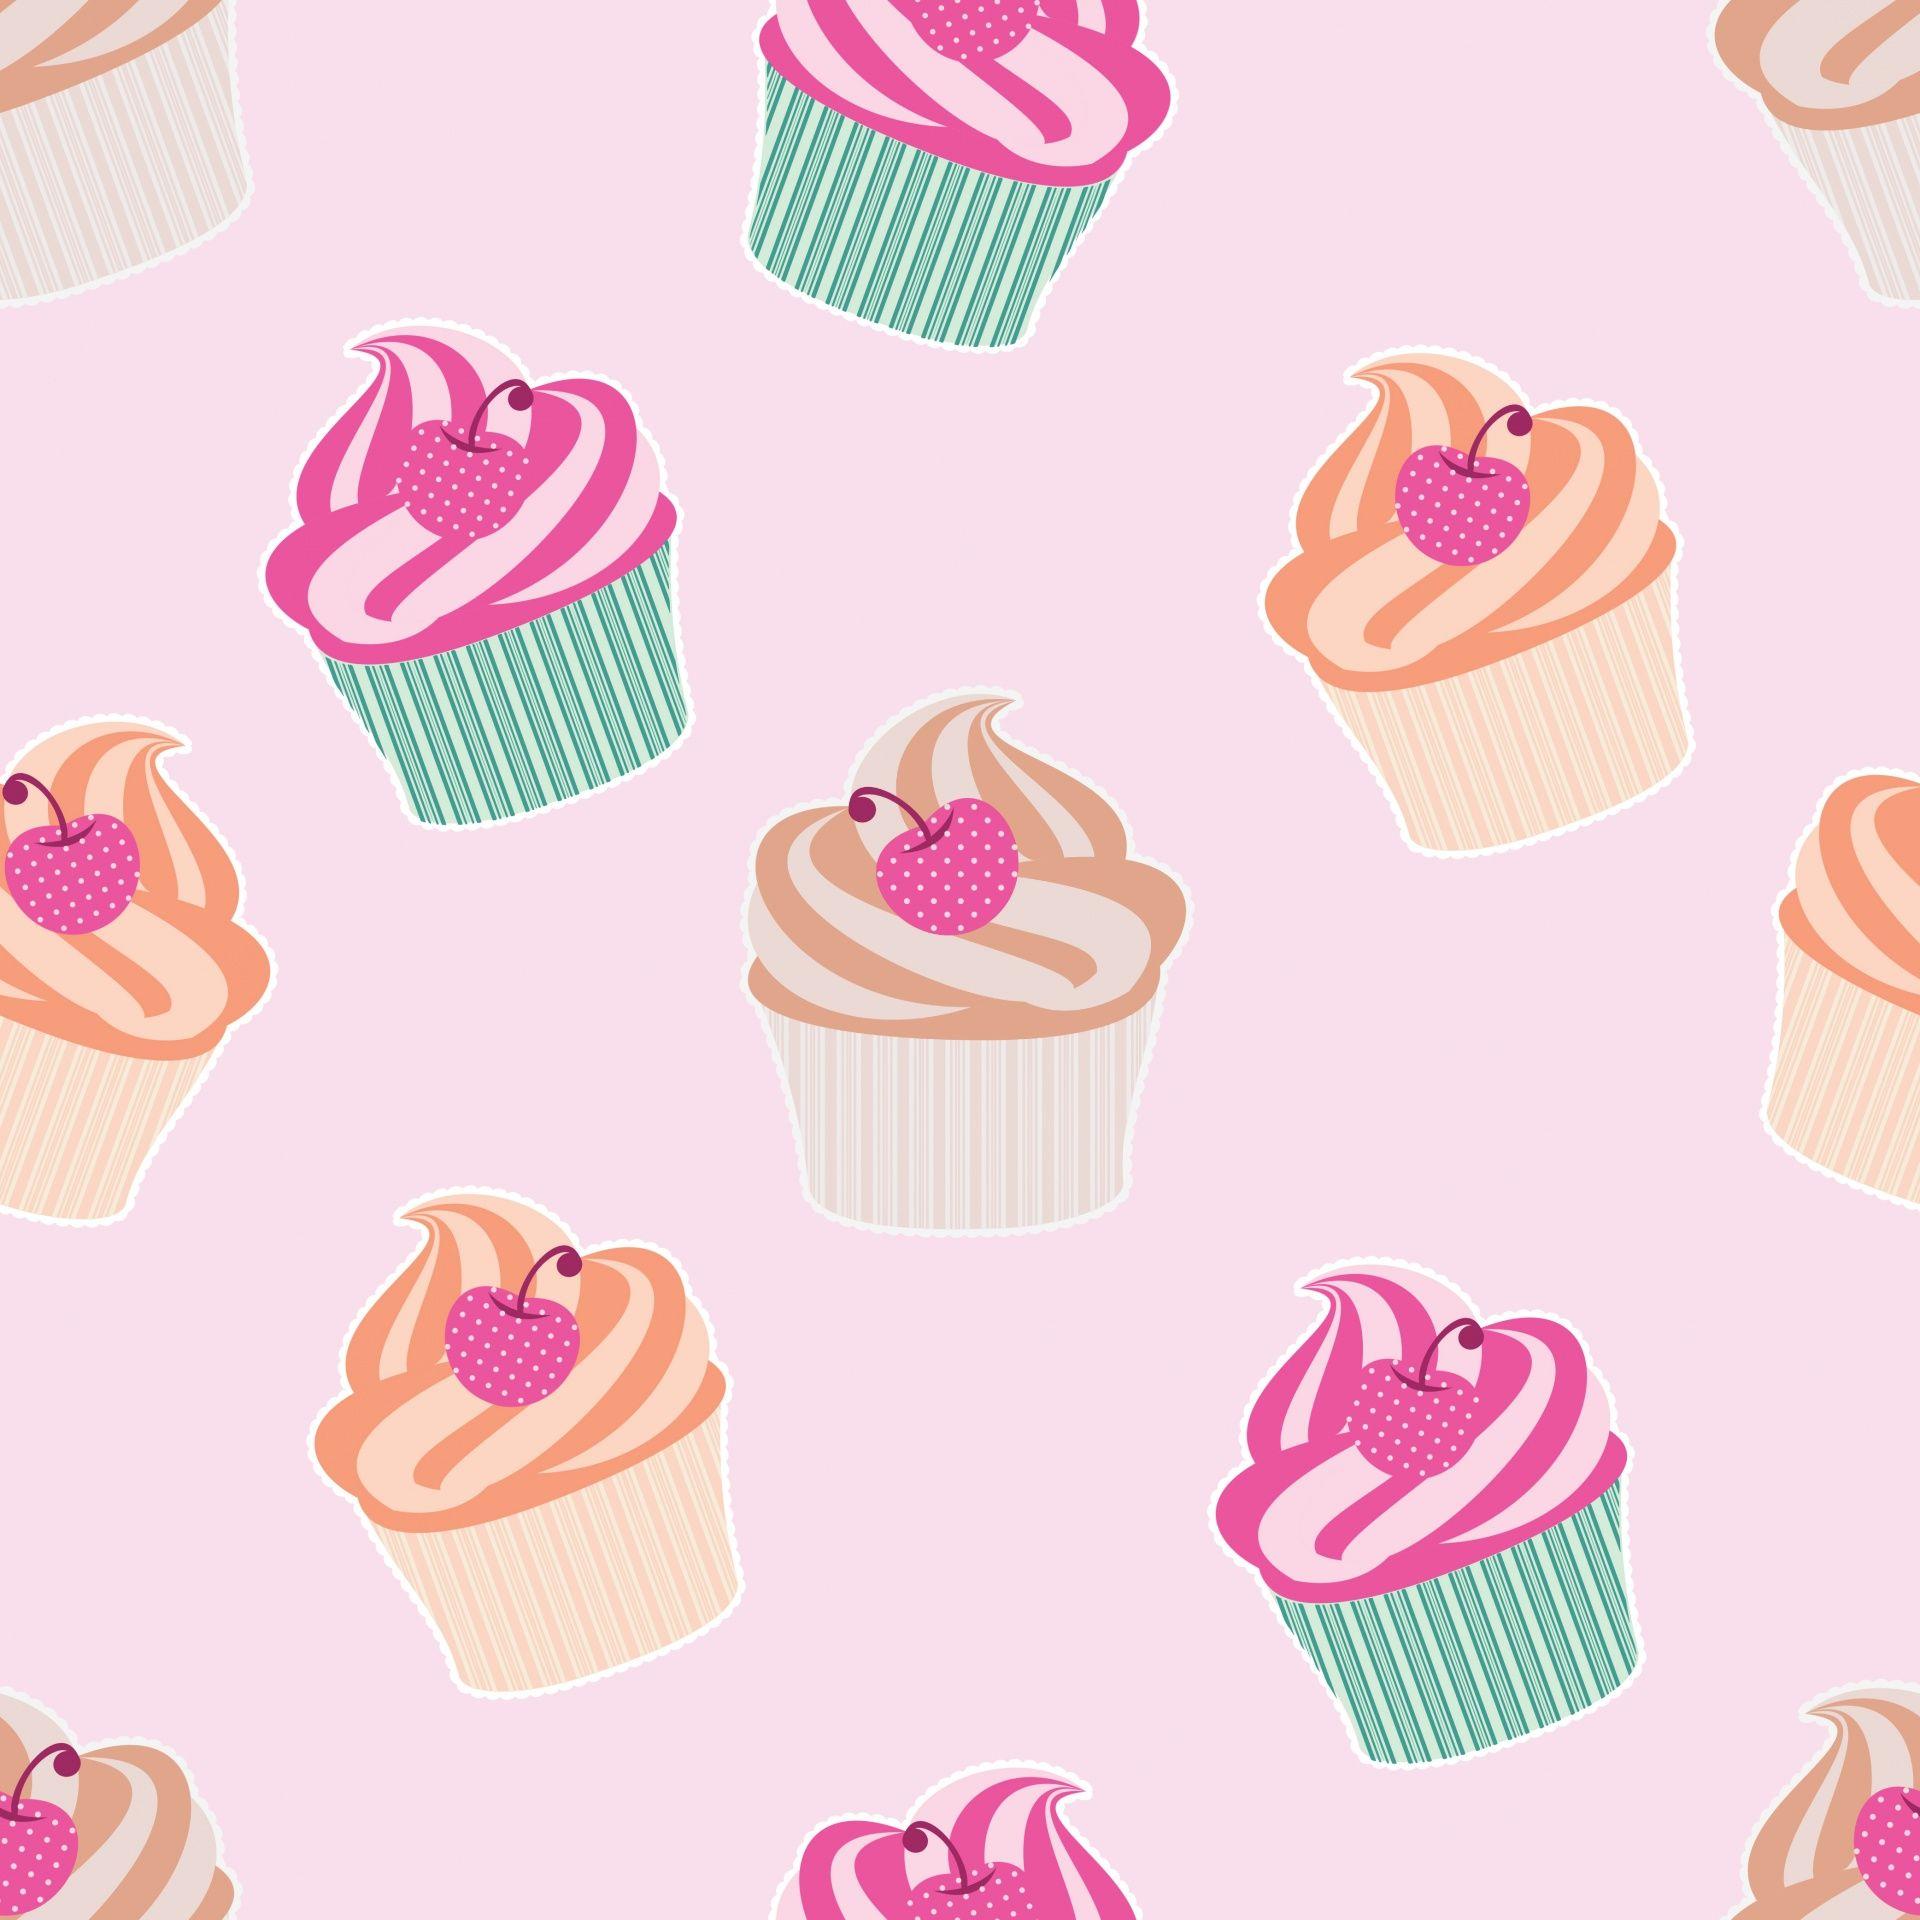 Colorful Cupcakes Wallpapers - Top Free Colorful Cupcakes Backgrounds ...